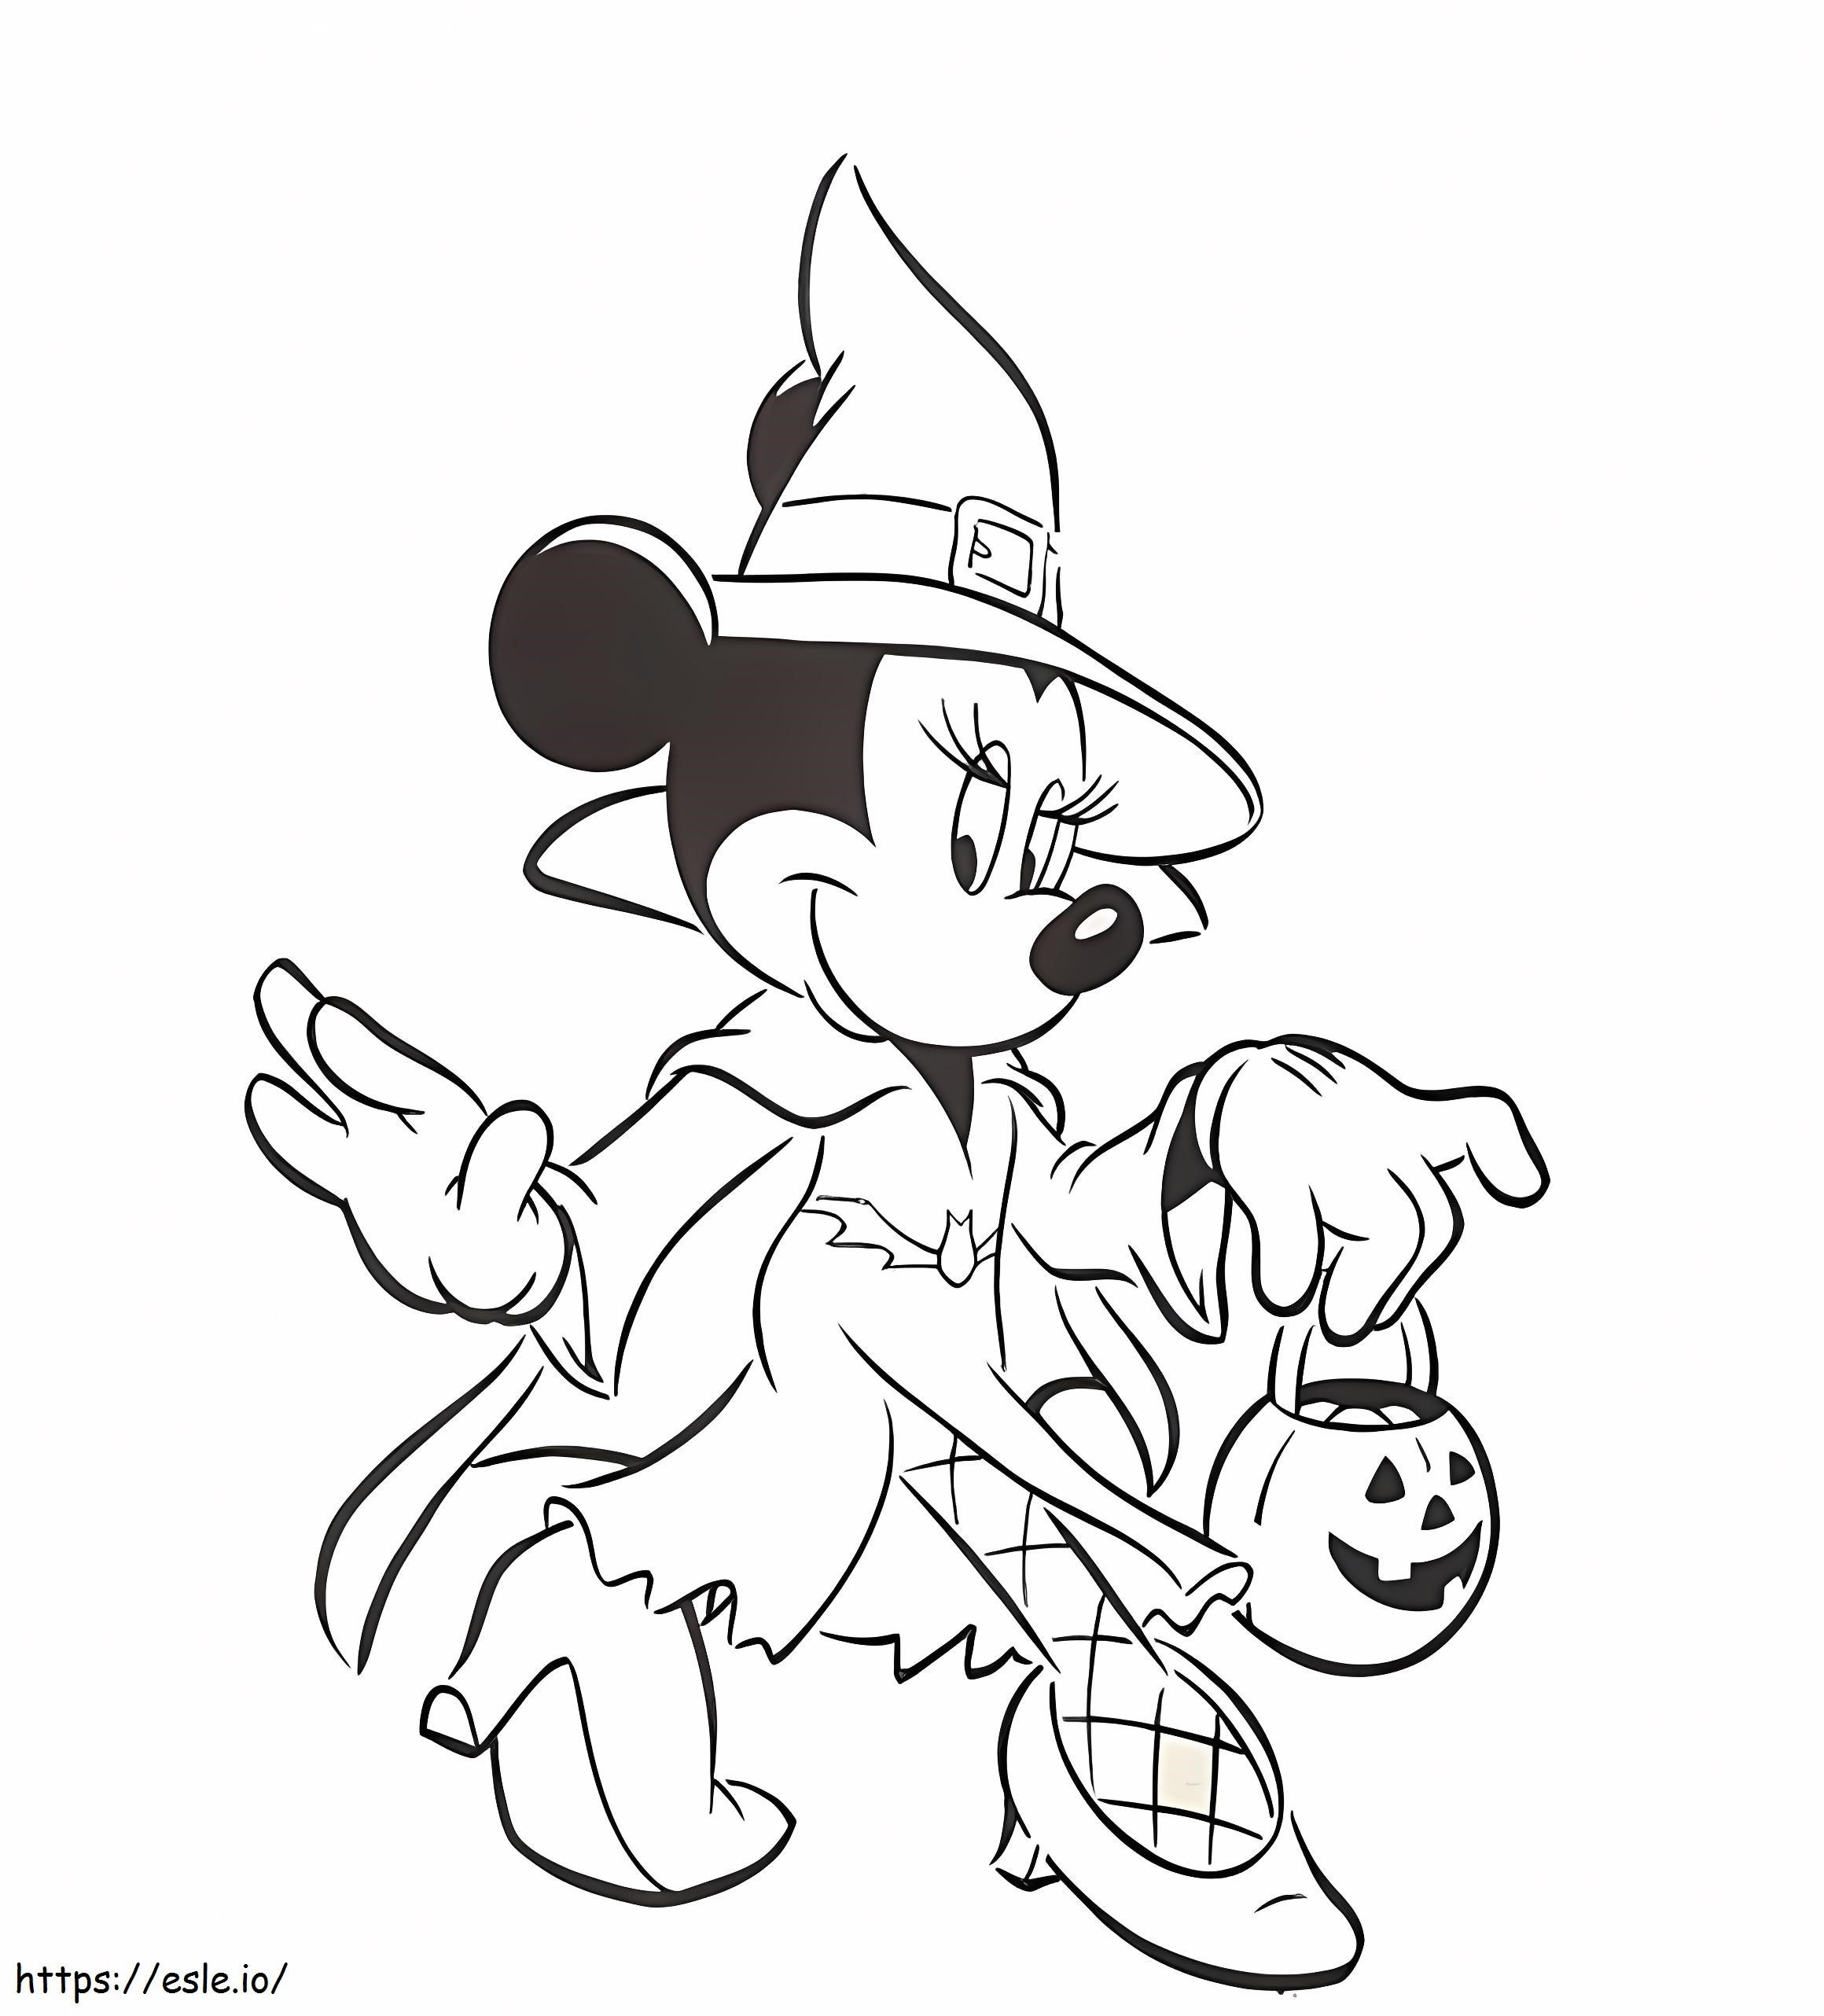 1539682580 Pumpkin And Mouse Halloween To Print Out For Free coloring page